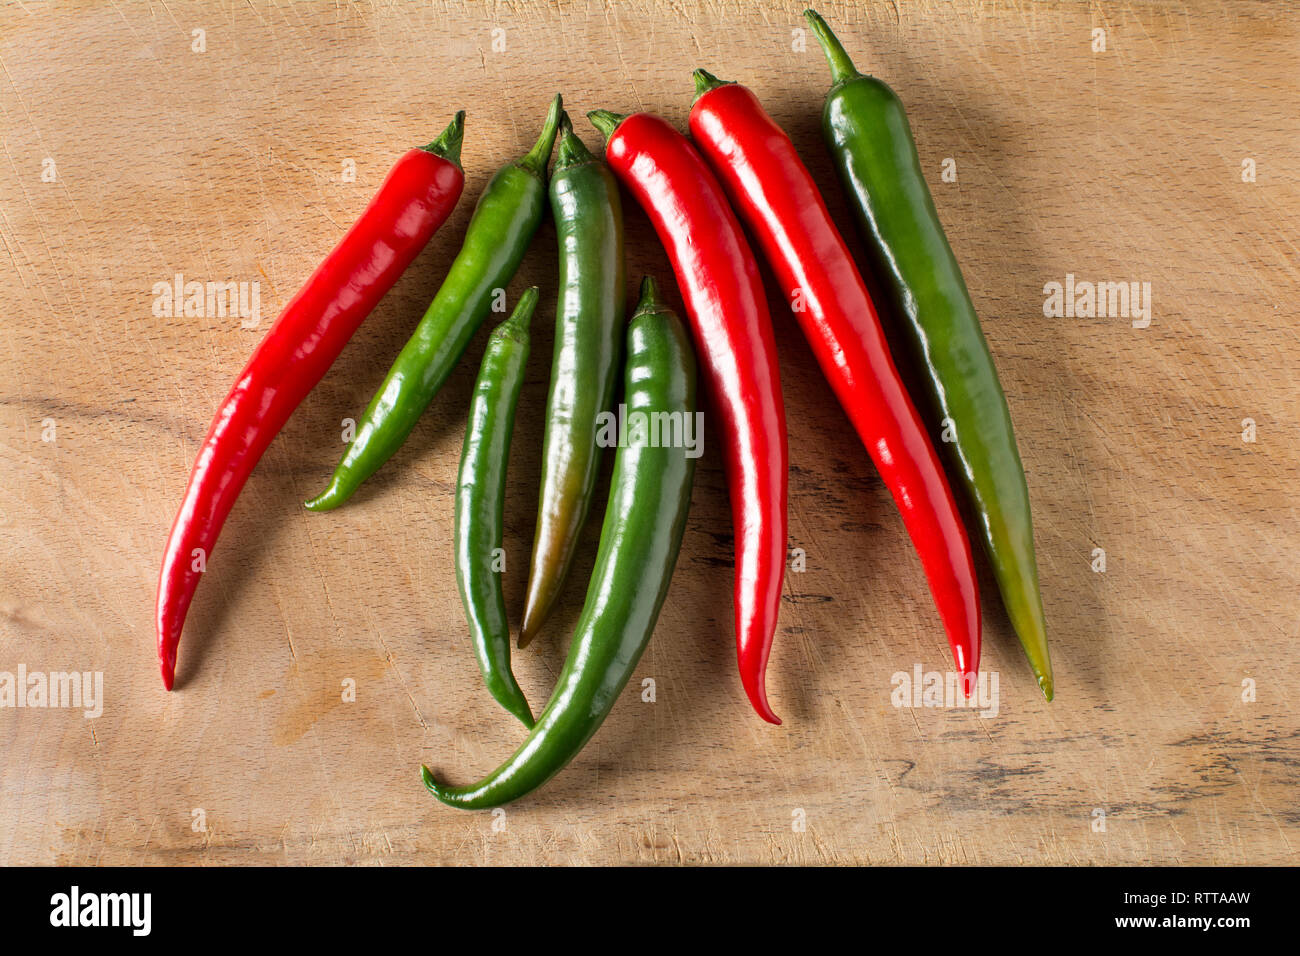 Red and green hot chilli peppers on a carving board with knife Stock Photo